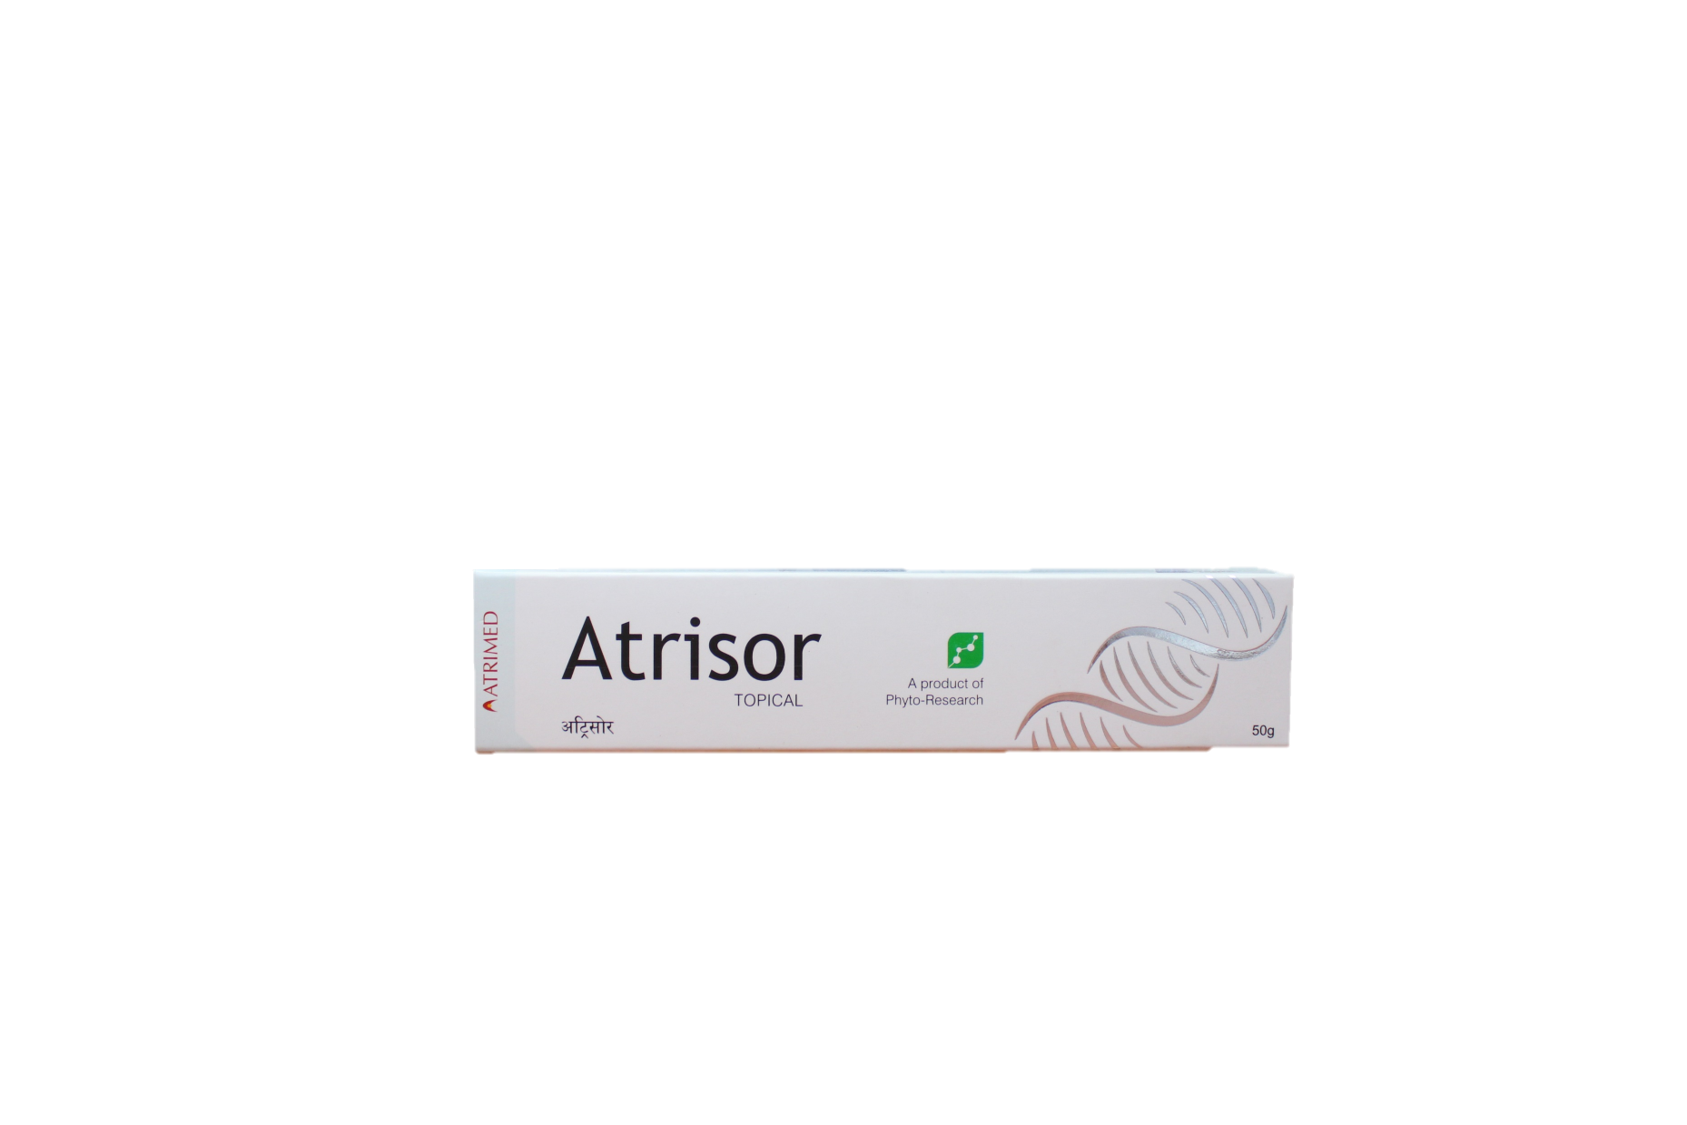 Shop Atrisor Topical Ointment 50gm at price 200.00 from Atrimed Online - Ayush Care